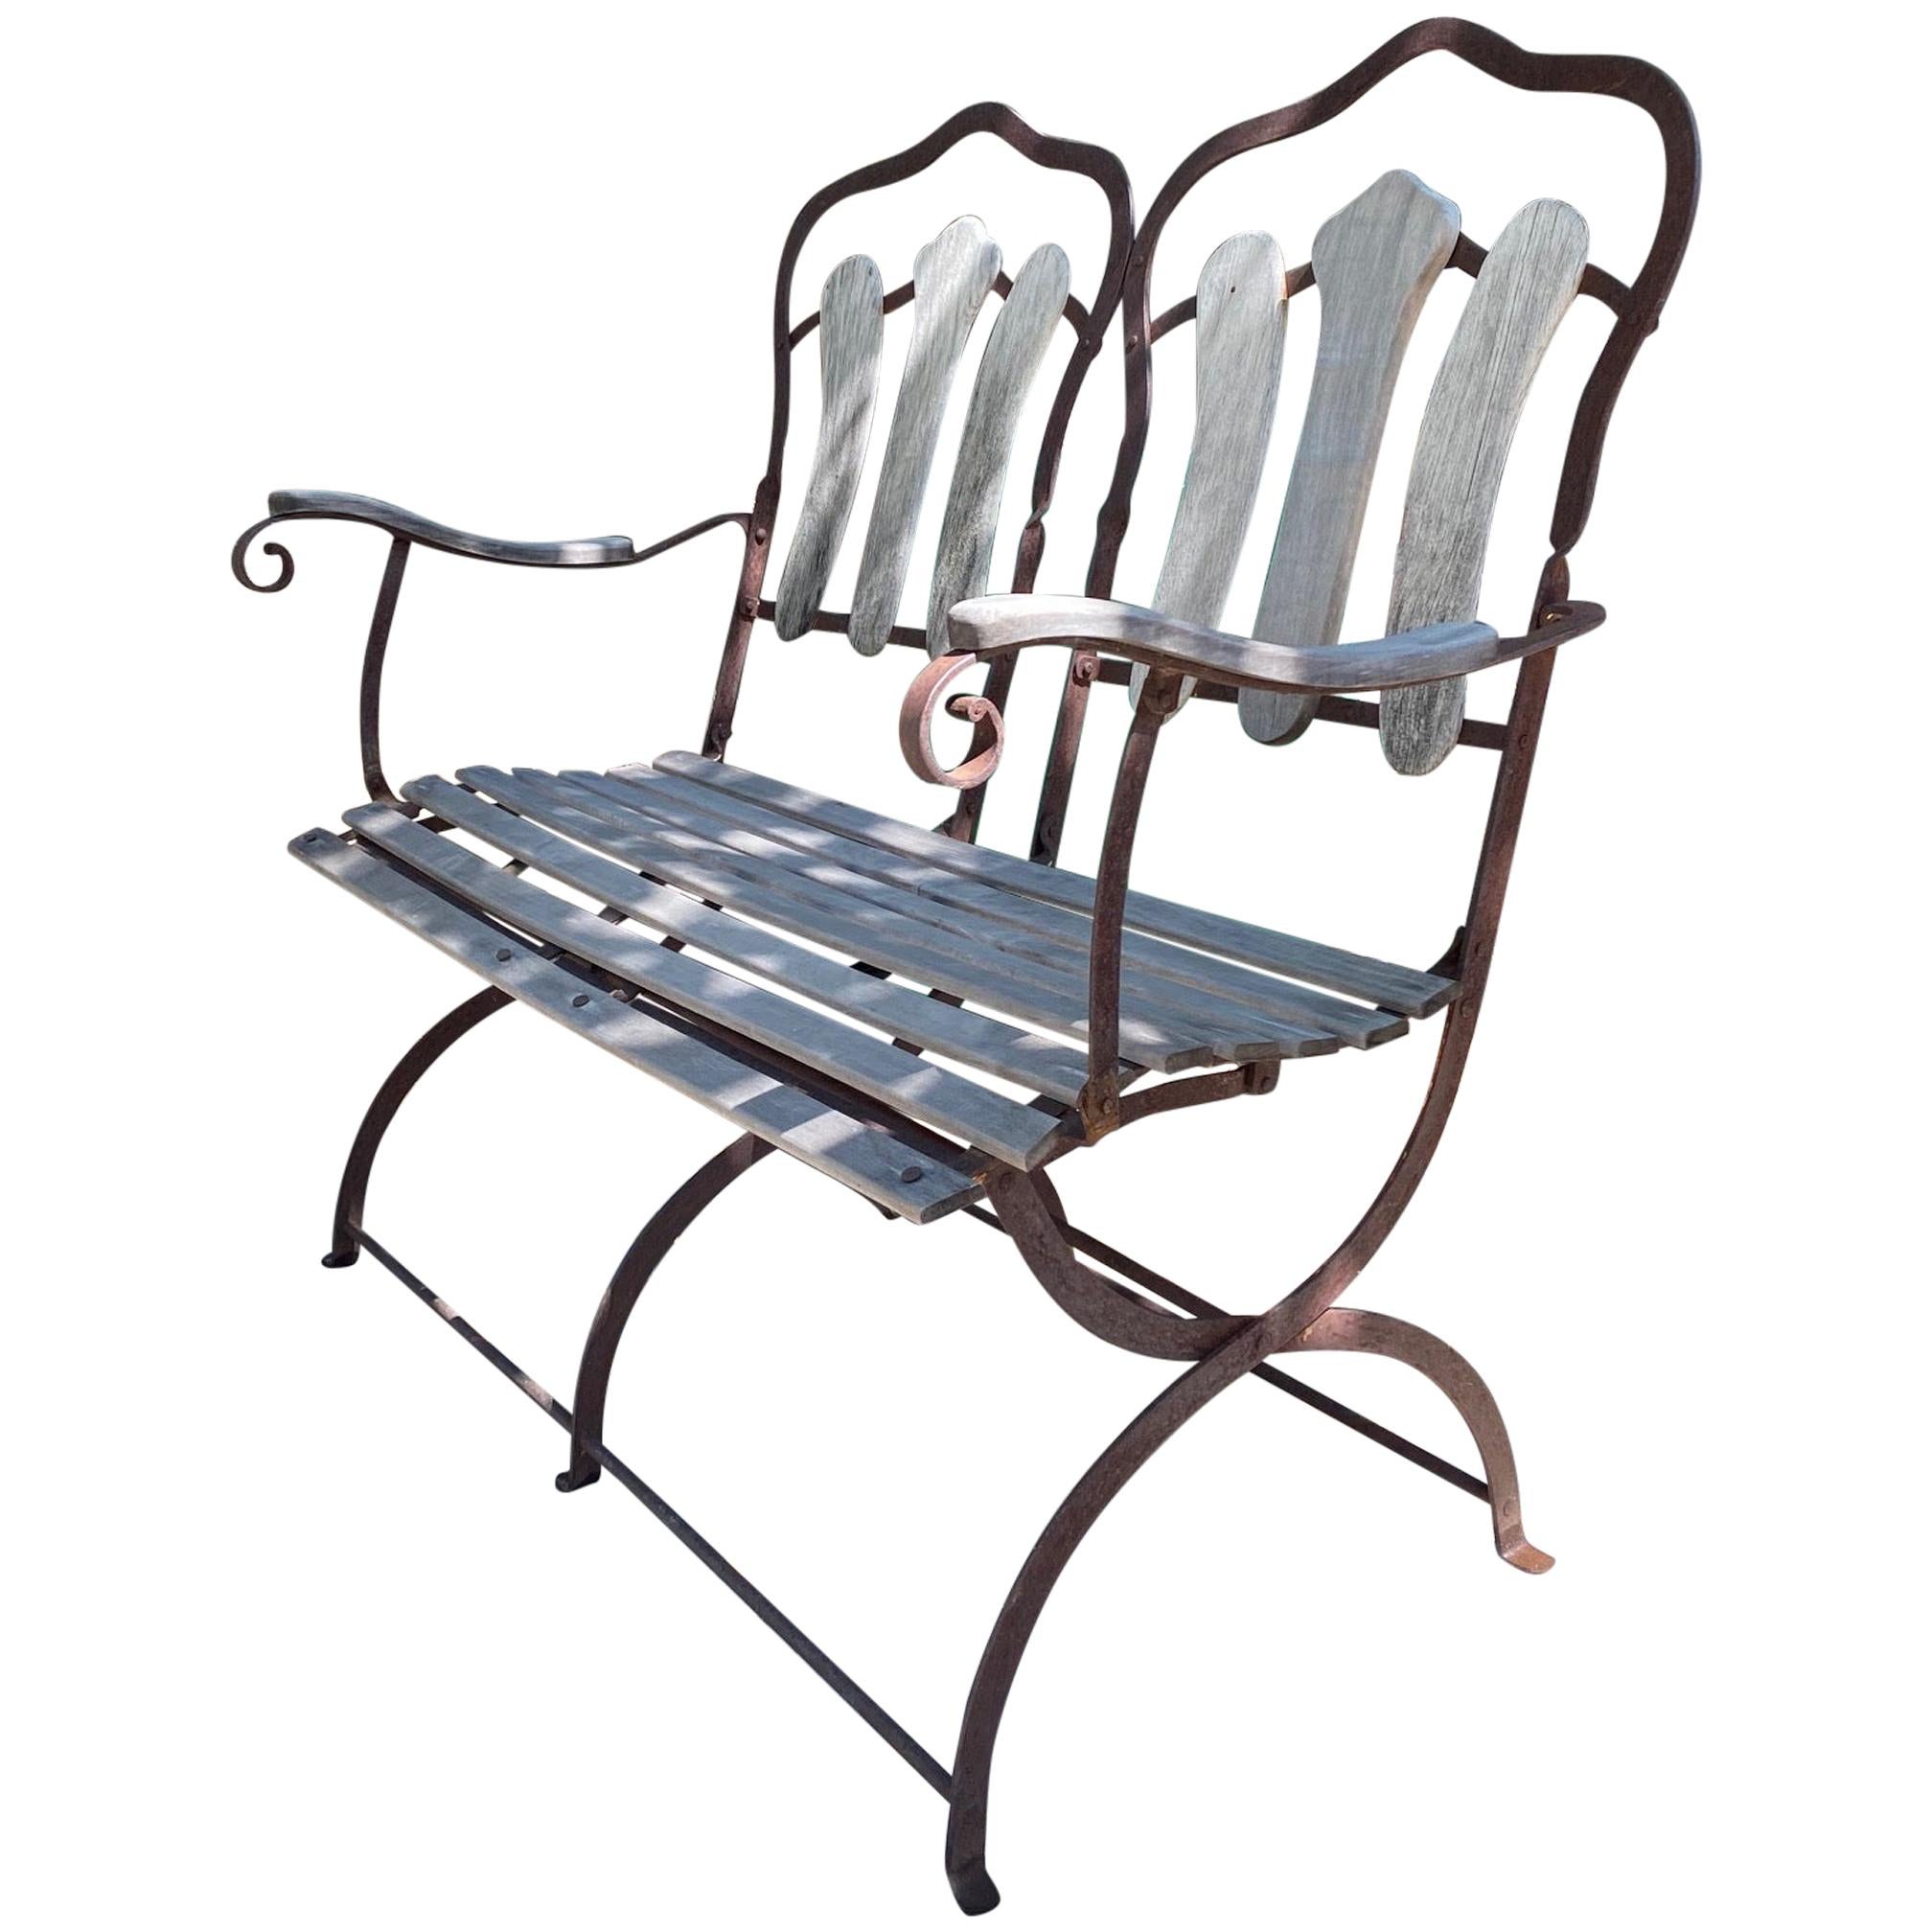 Hand Forged Iron & Wood Garden Park Bench Seat Furniture Antiques Los Angeles CA